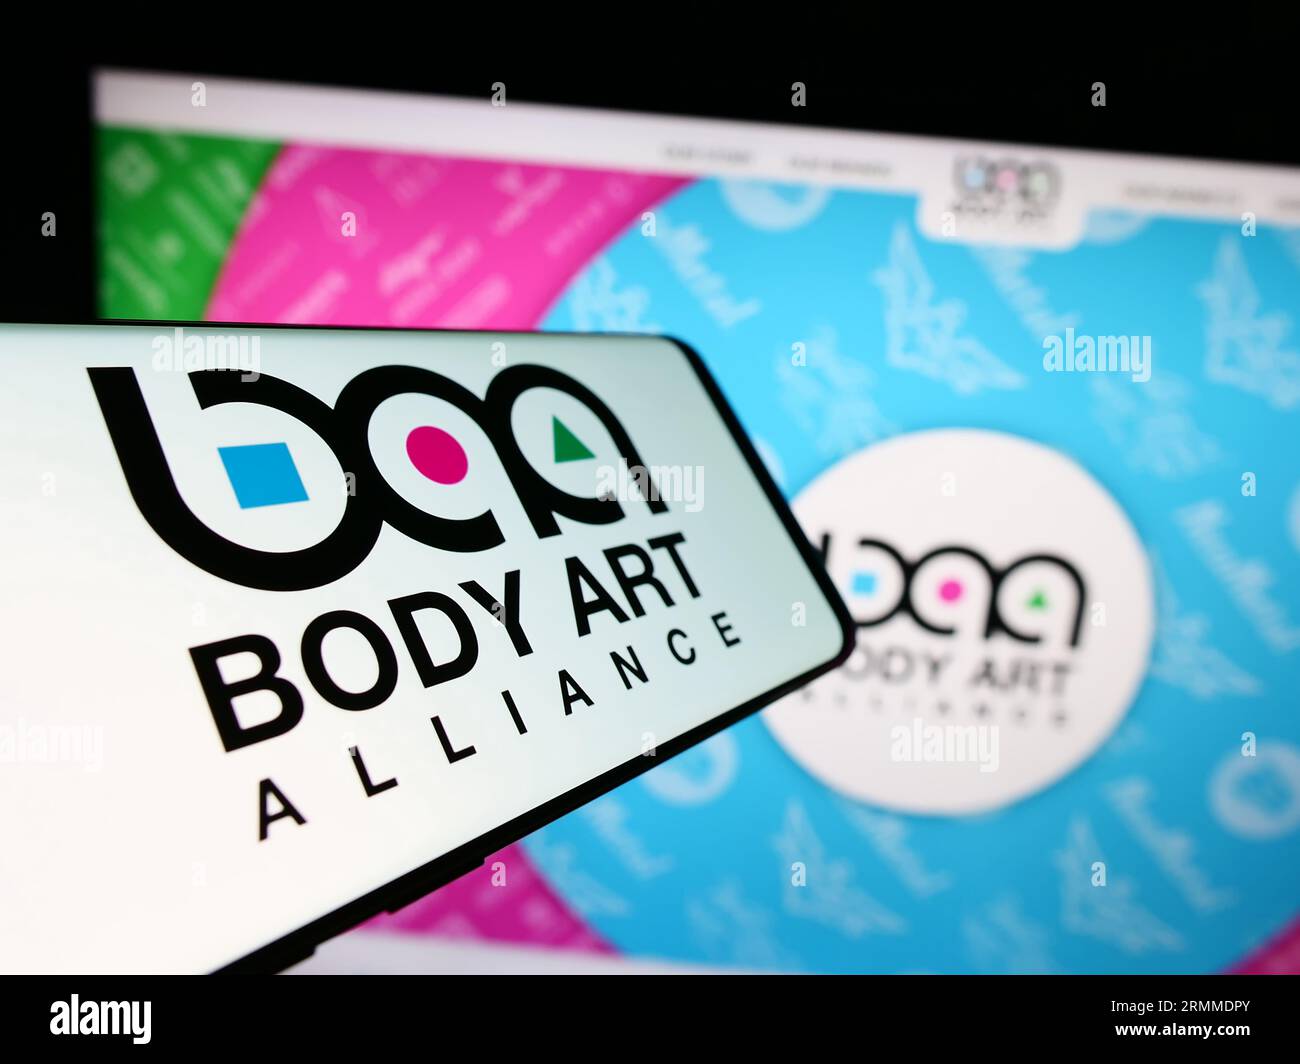 Smartphone with logo of American cosmetics company Body Art Alliance on screen in front of website. Focus on center-left of phone display. Stock Photo